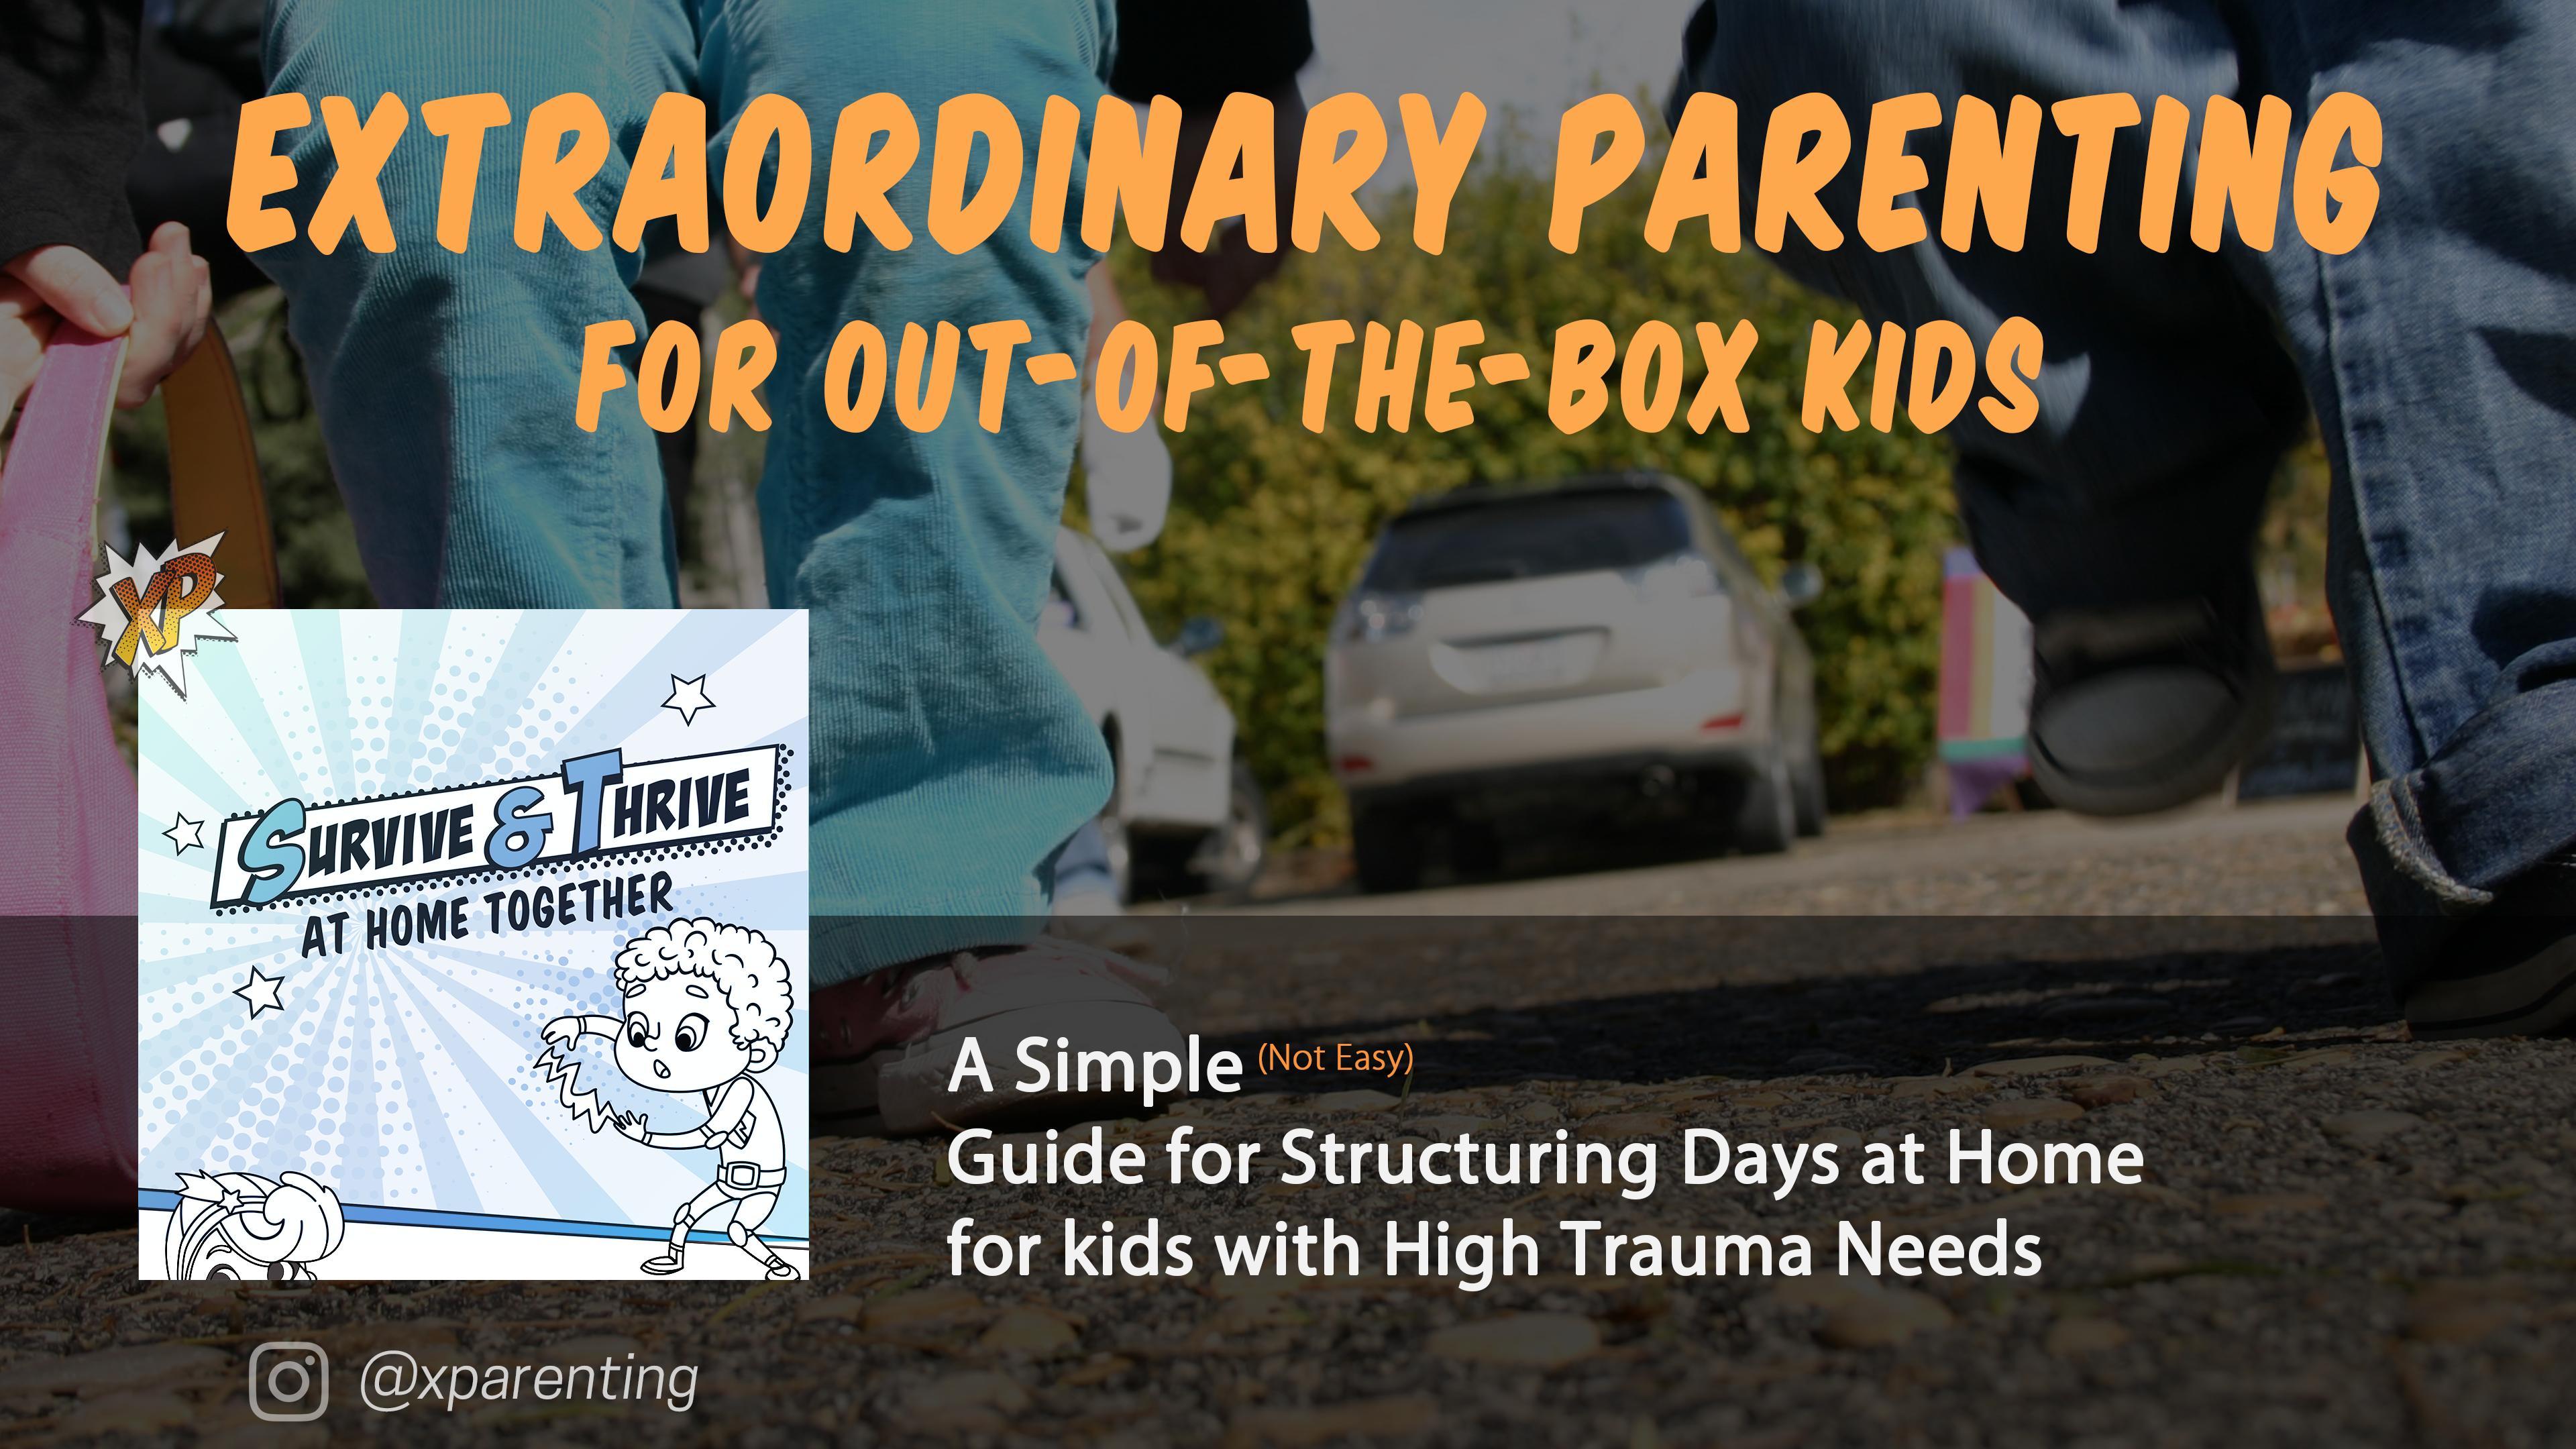 The Importance of Meeting Basic Needs for Children with High Trauma Needs